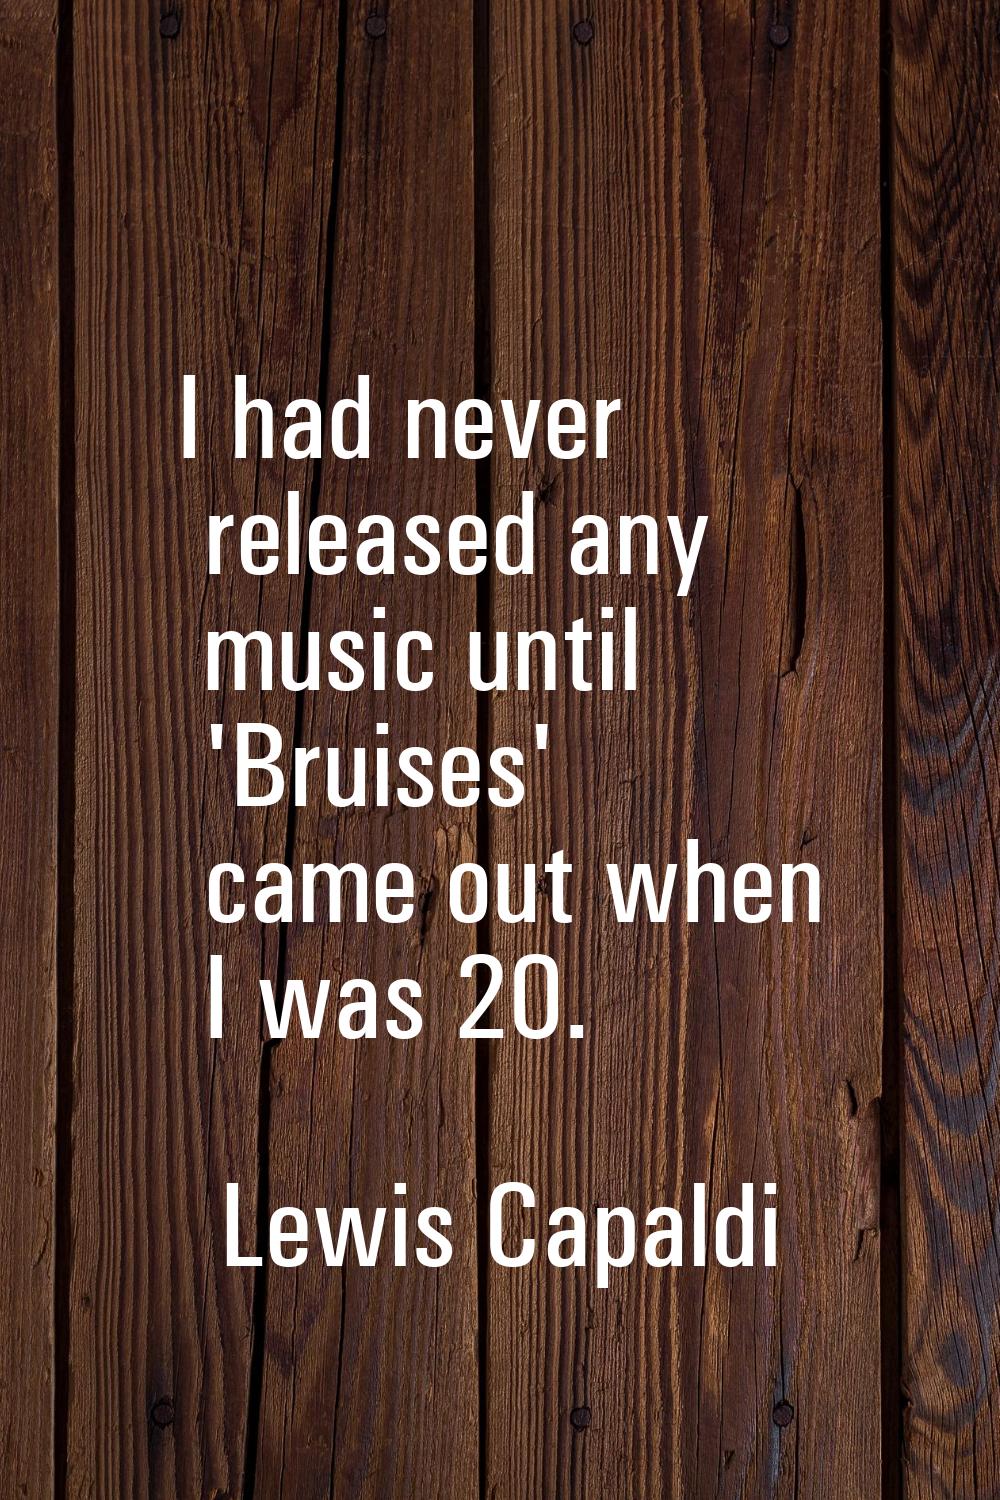 I had never released any music until 'Bruises' came out when I was 20.